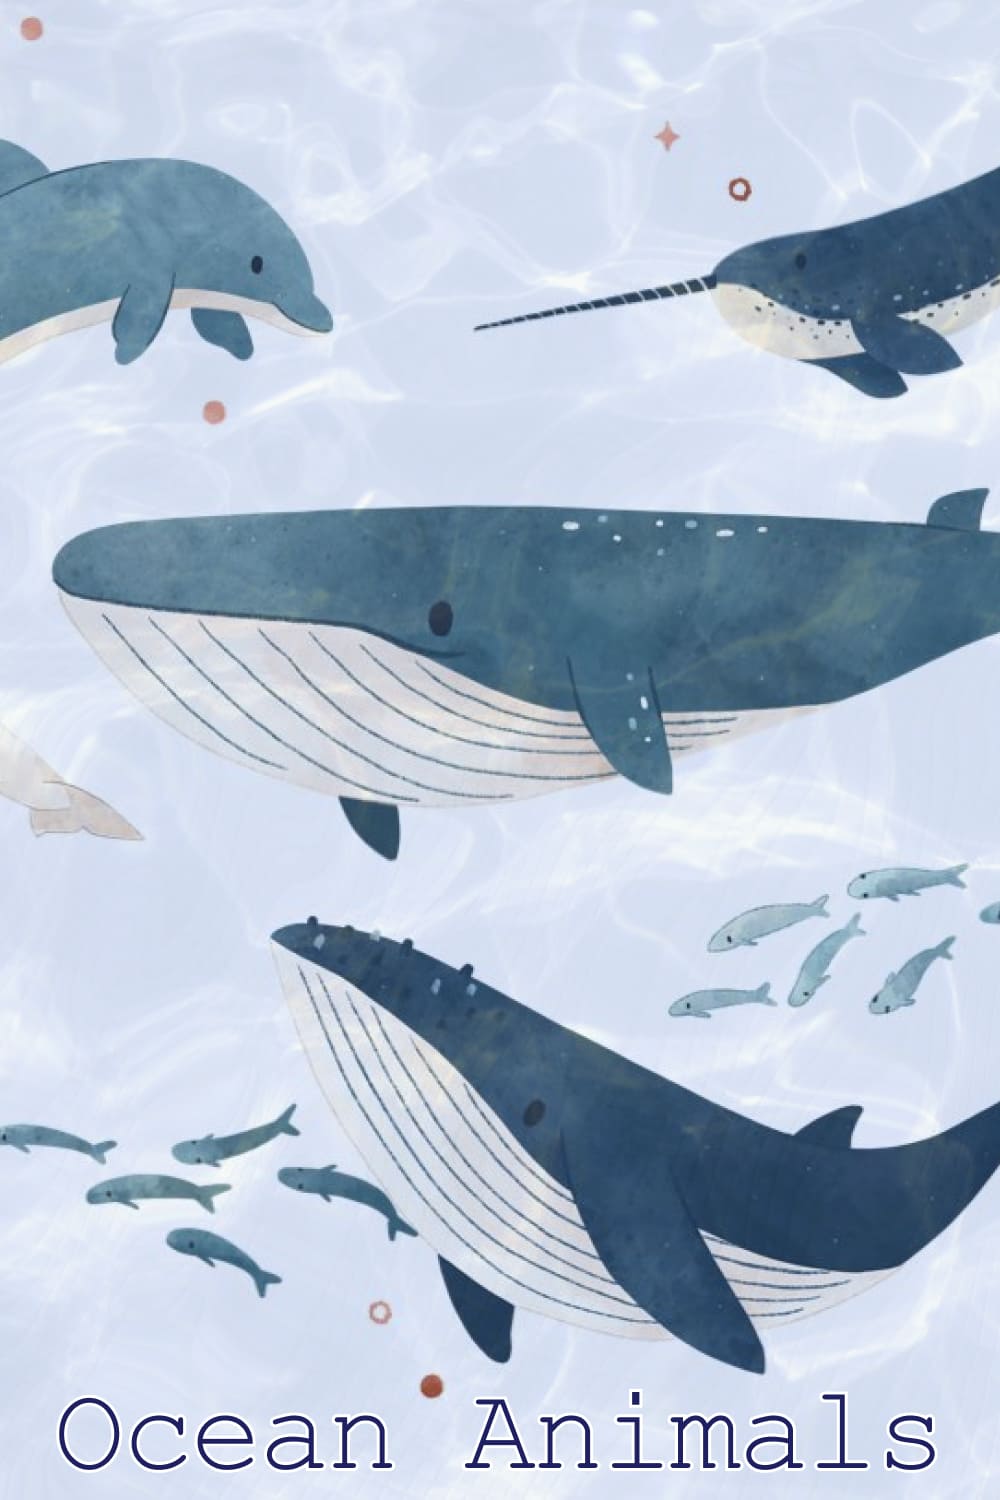 Ocean Animals - preview image.